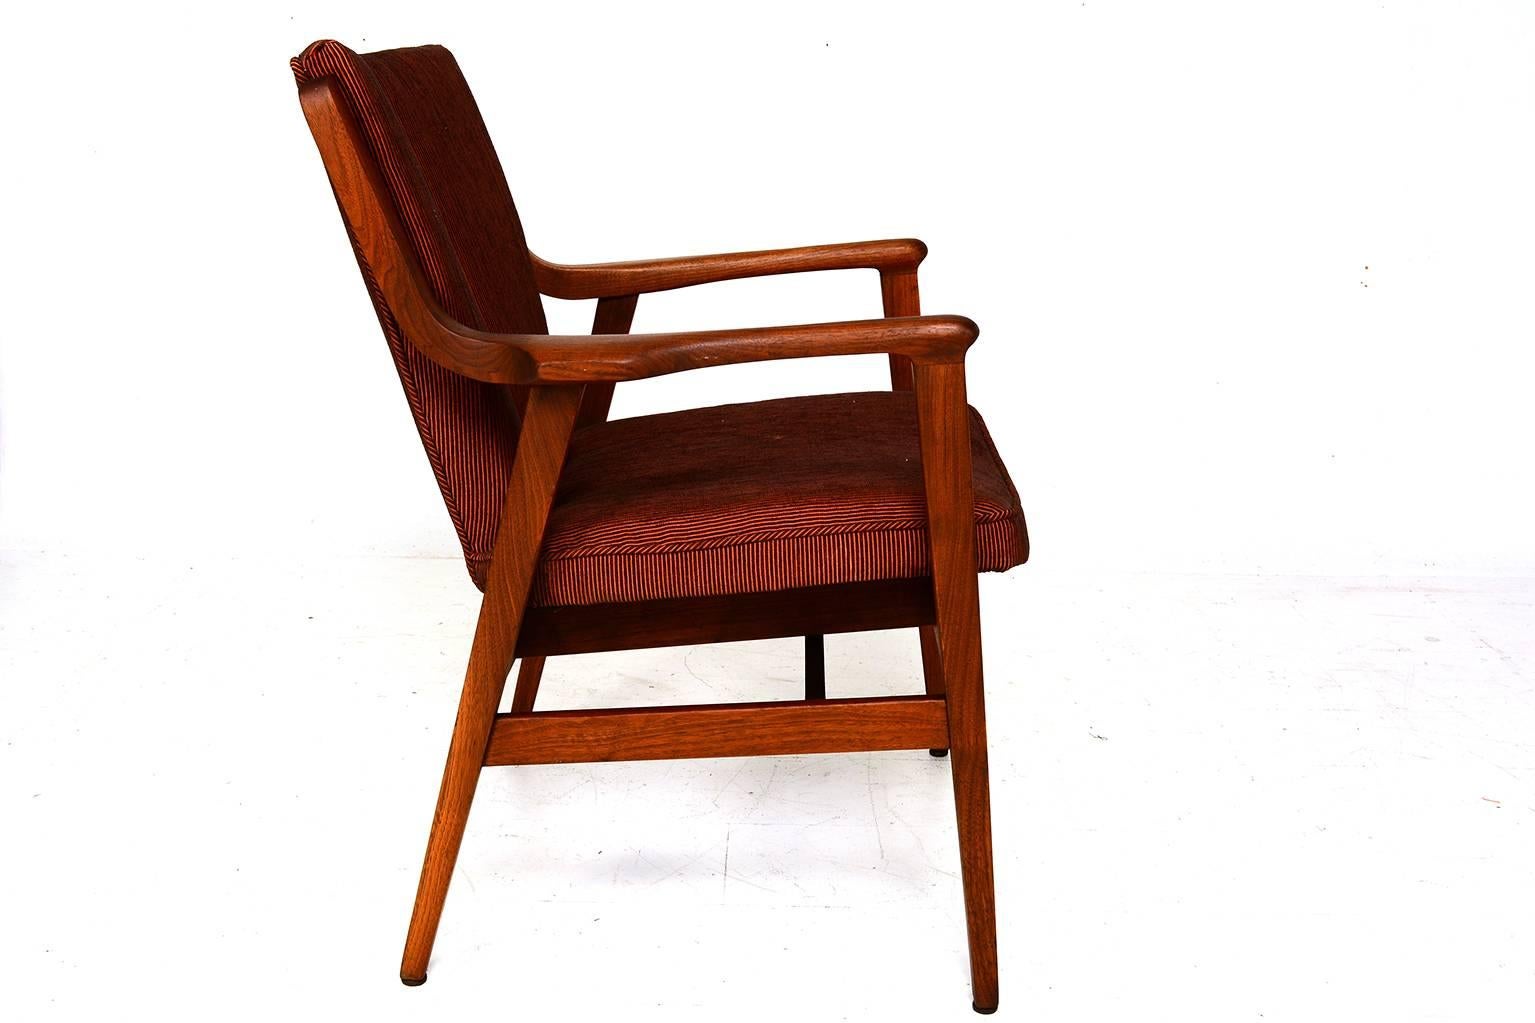 For your consideration a Mid-Century walnut chair by Gunlocke. 

Solid walnut wood with sculptural shape. 

New upholstery in red color in vertical stripes.